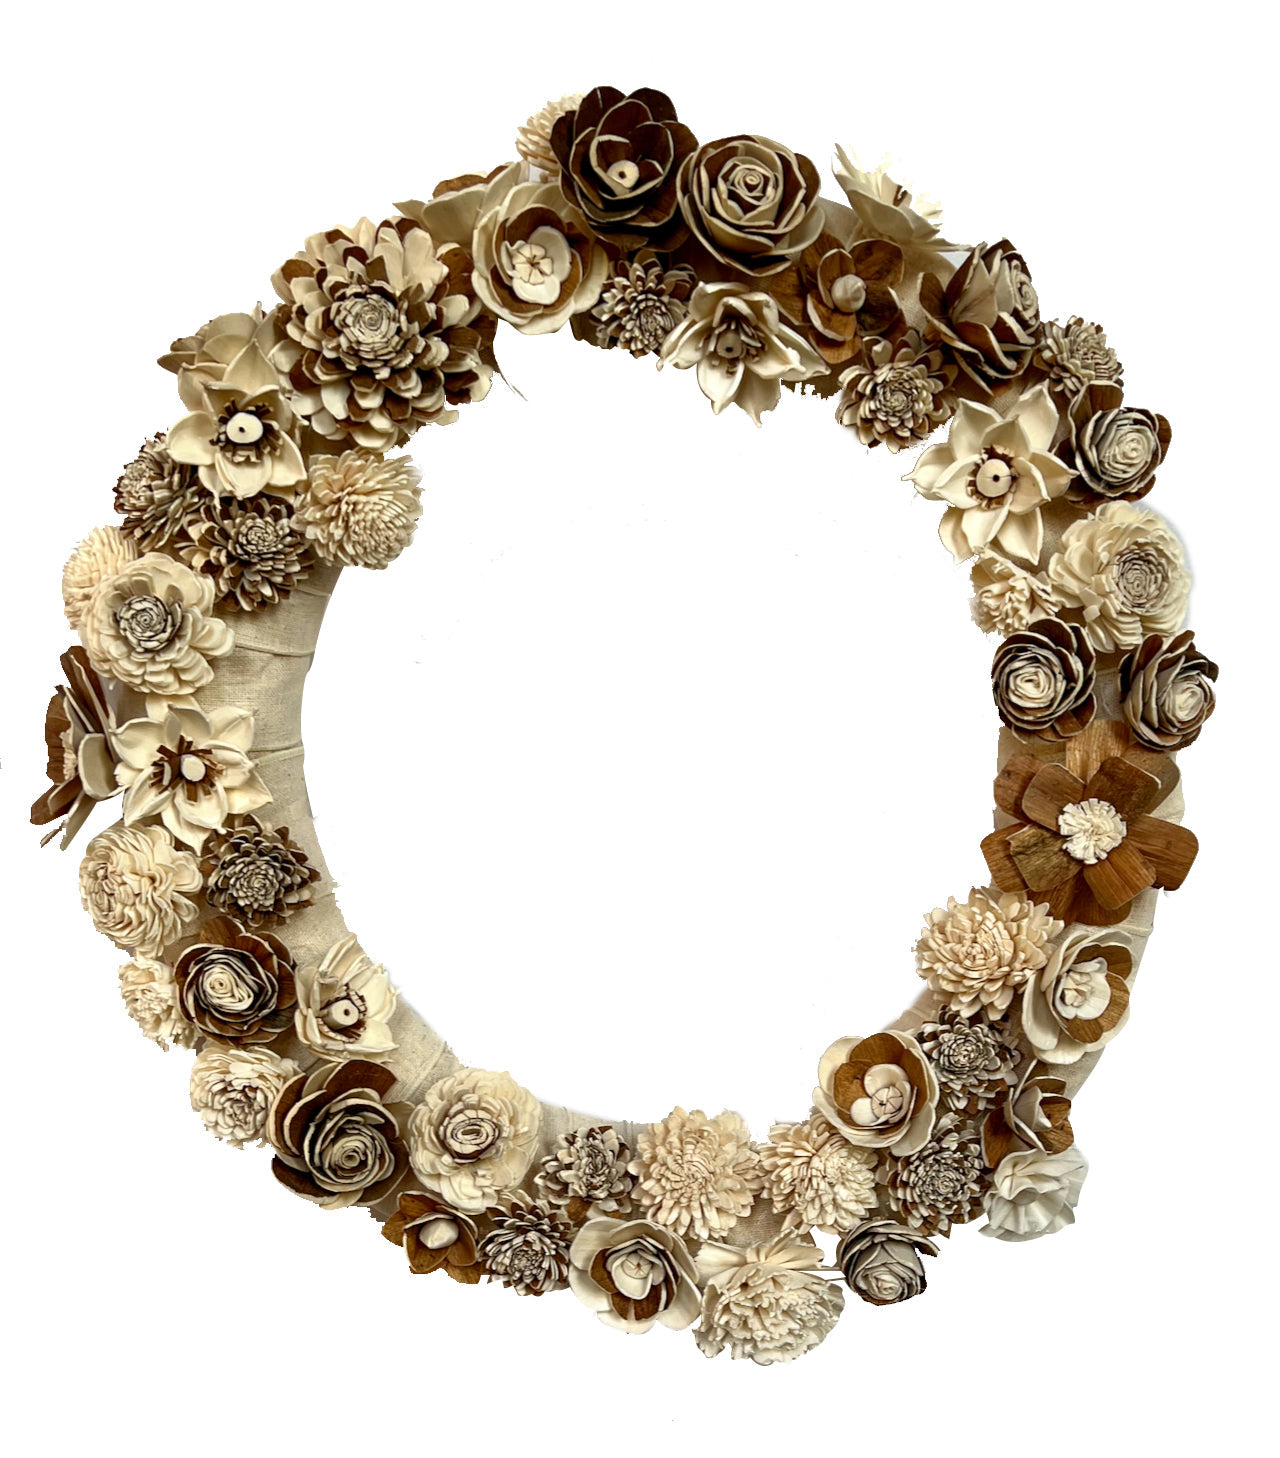 Gifts for Mom - Sola Wood Floral Wreath